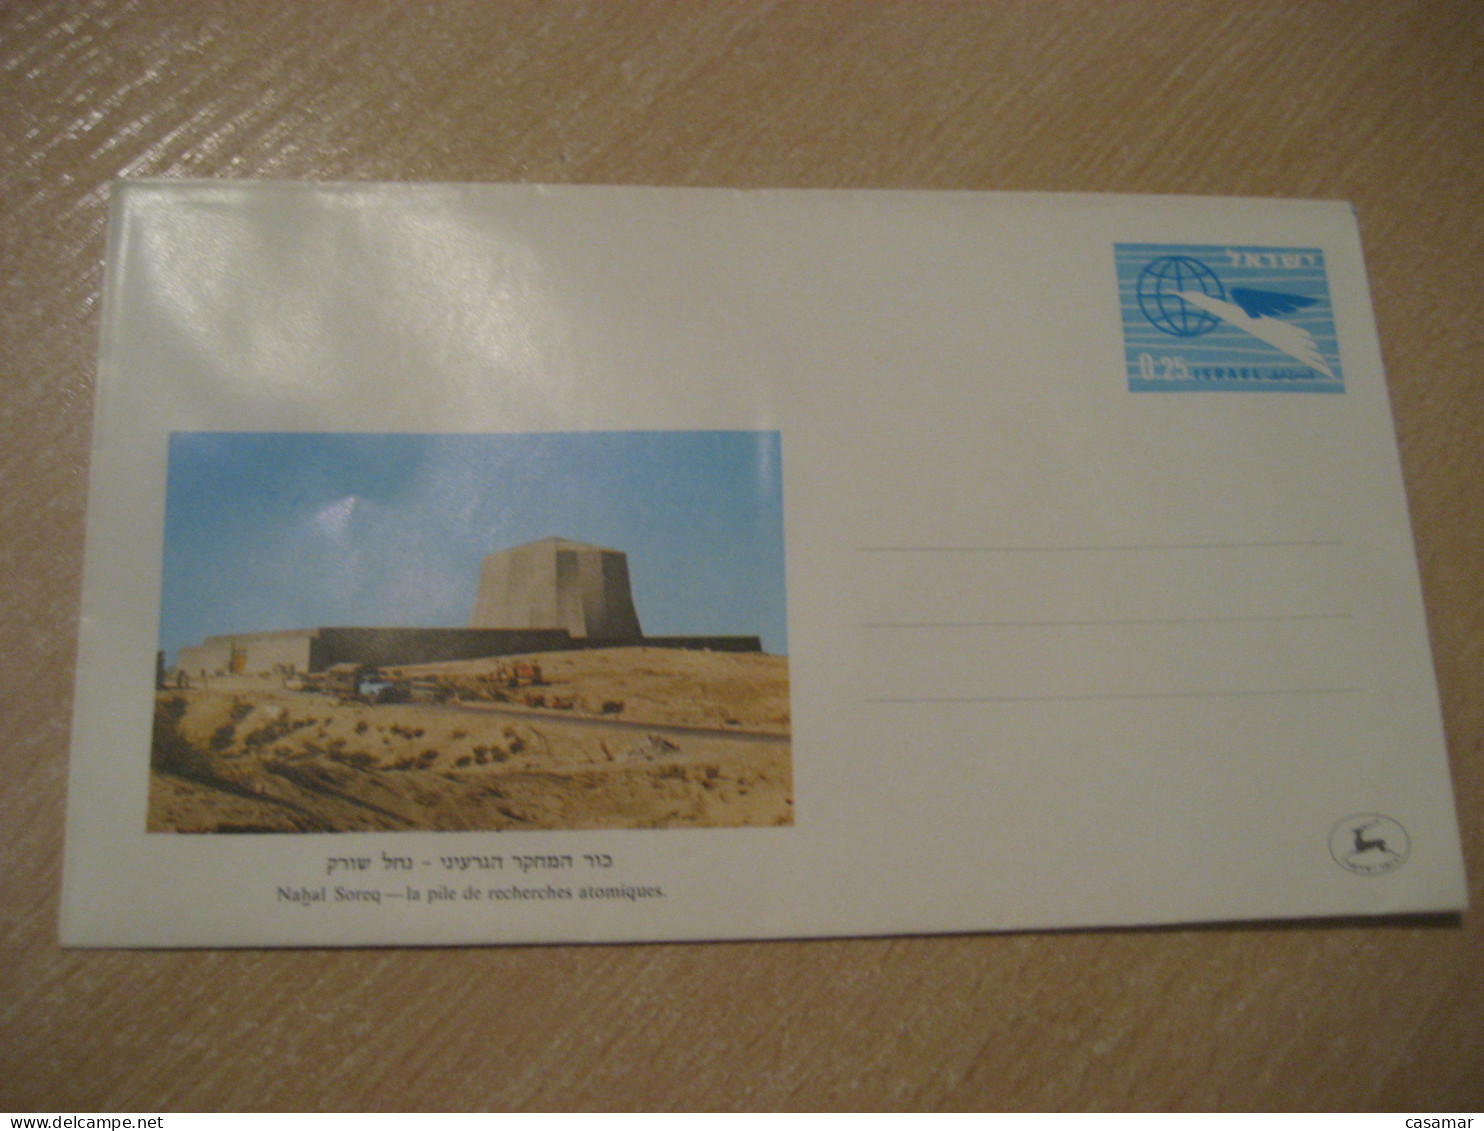 NAHAL SOREQ La Pile De Recherches Atomiques The Atomic Research Stack Physics Postal Stationery Cover ISRAEL Physique - Physik